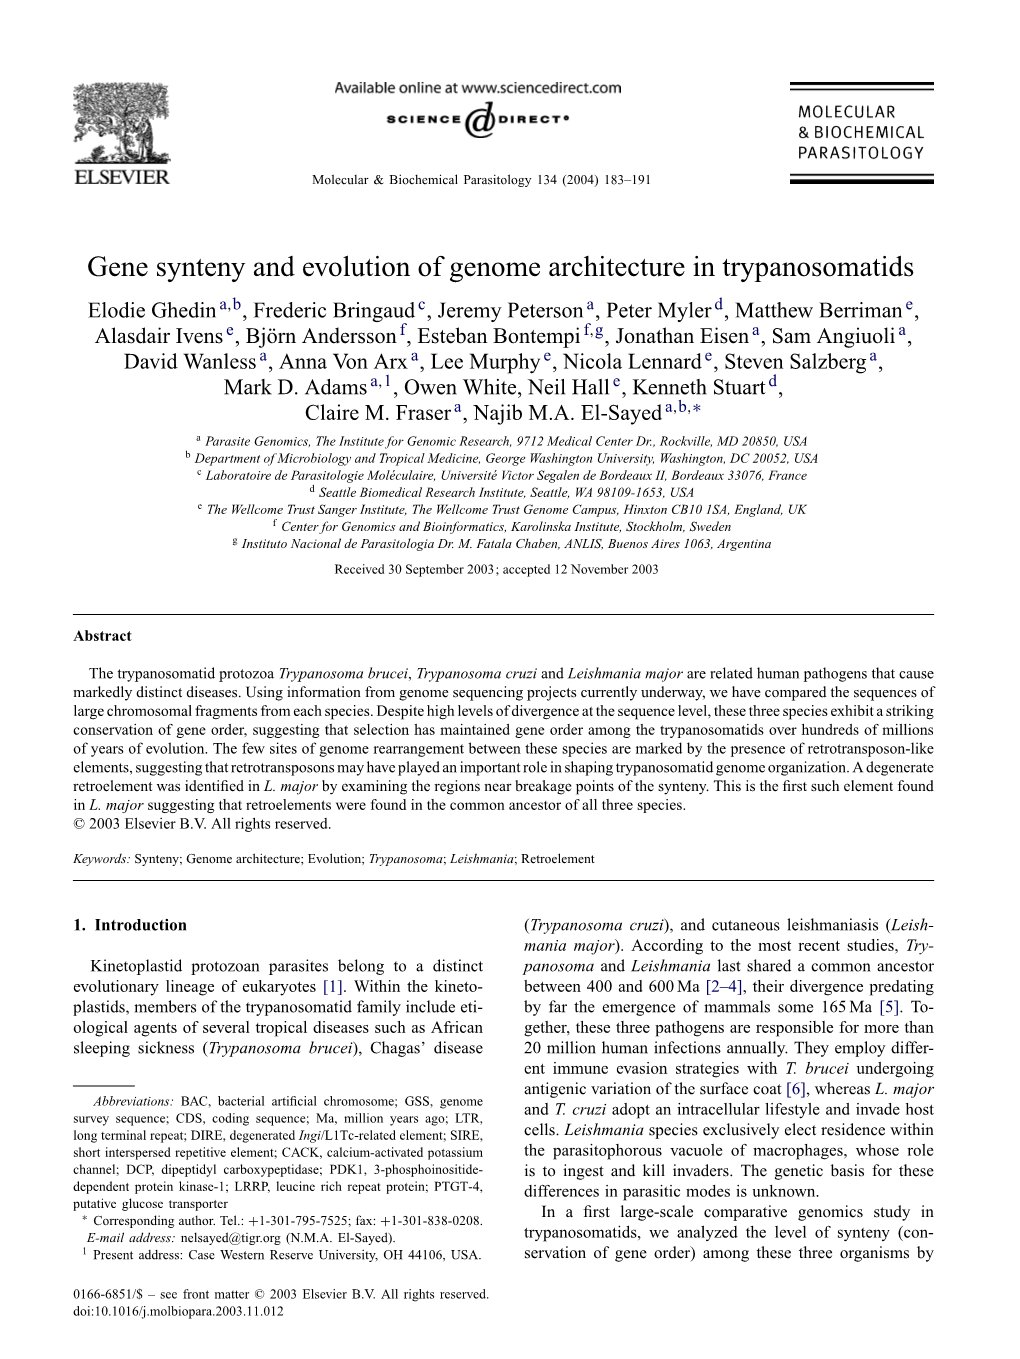 Gene Synteny and Evolution of Genome Architecture In